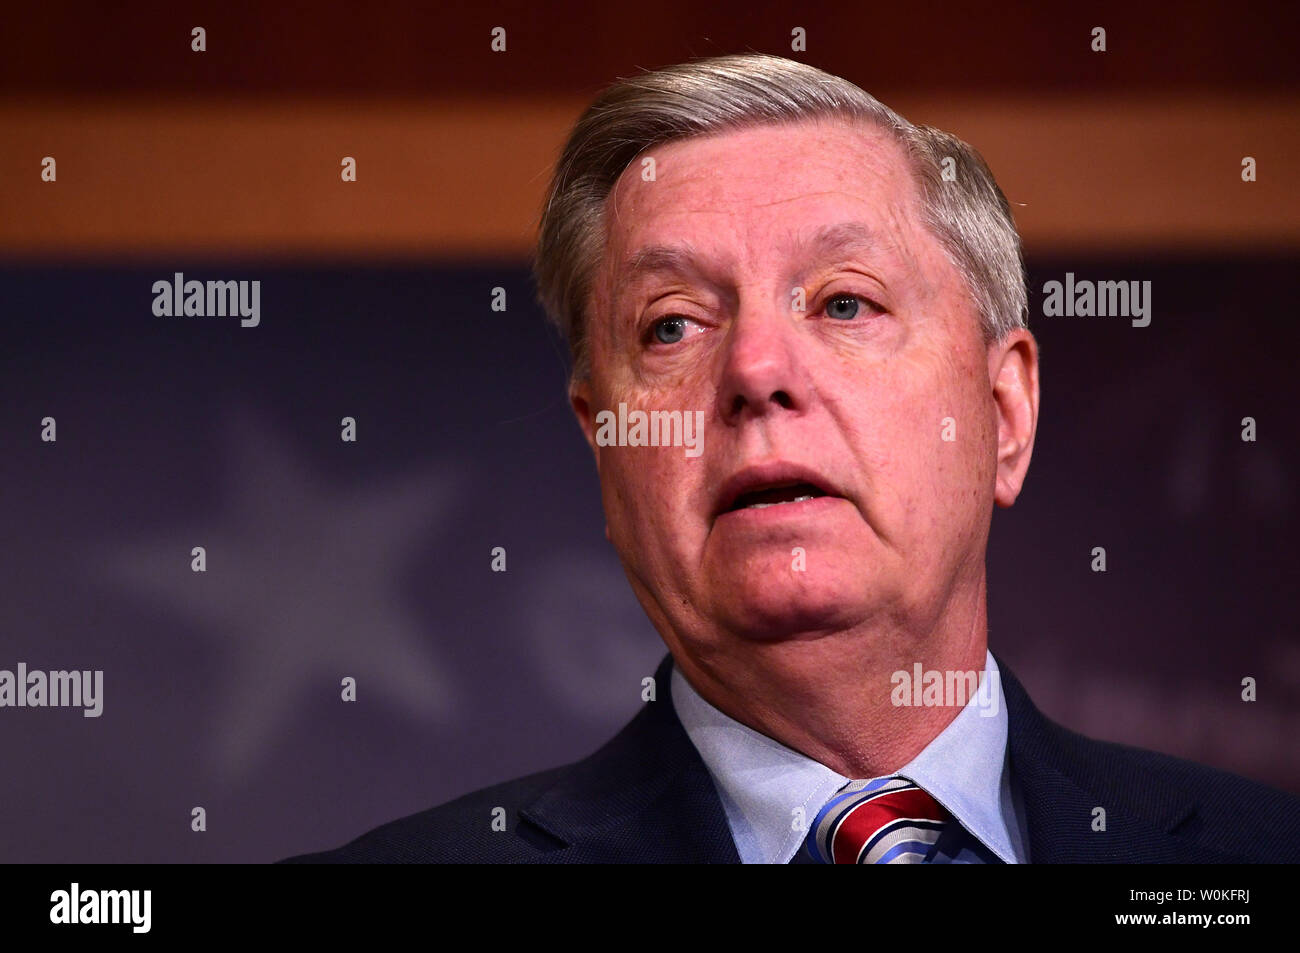 Sen. Lindsey Graham, R-S.C., speaks to the media on Special Counsel Robert Mueller's report into potential collusion between the Trump campaign and Russia, on Capitol Hill in Washington, D.C. on March 25 2019. The Muller Report was released to the Justice Department on Friday and, according to a letter released by Attorney General Barr, said there was no evidence that the Trump campaign conspired or coordinated with Russia in the 2016 presidential election. Photo by Kevin Dietsch/UPI Stock Photo